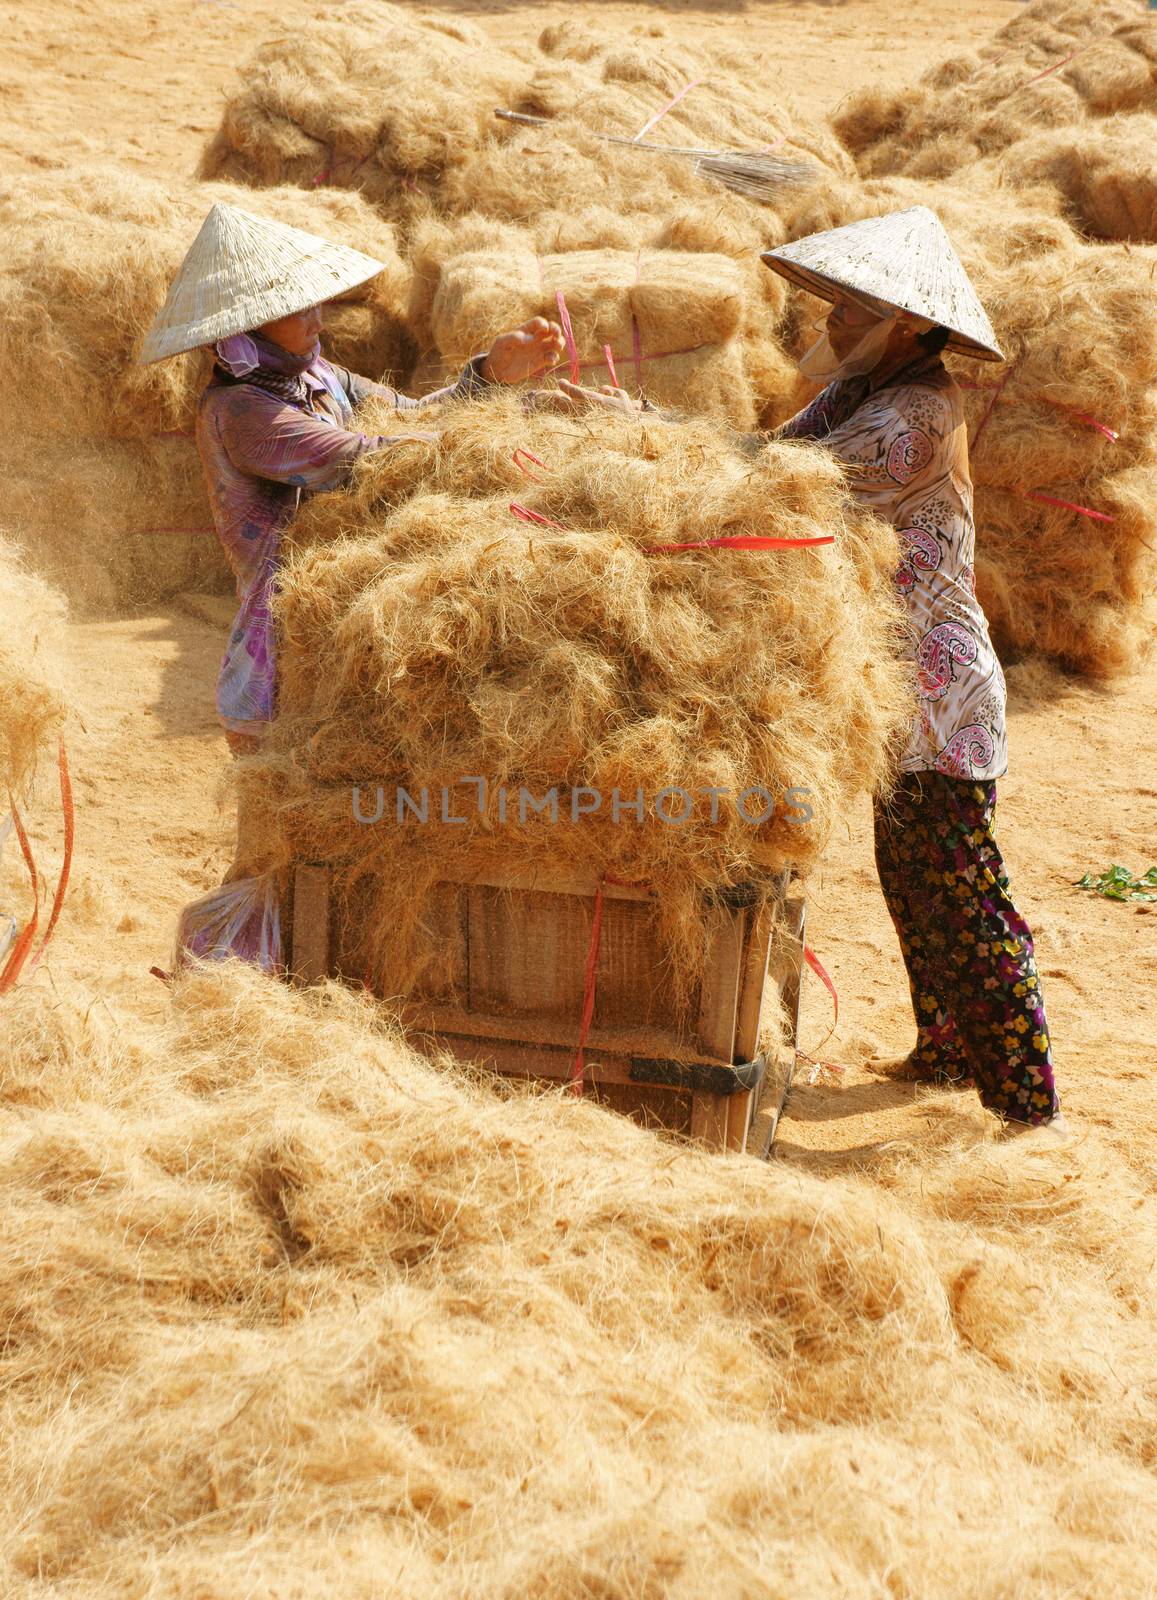 Asian worker, coconut, Vietnamese, coir, Mekong Delta by xuanhuongho